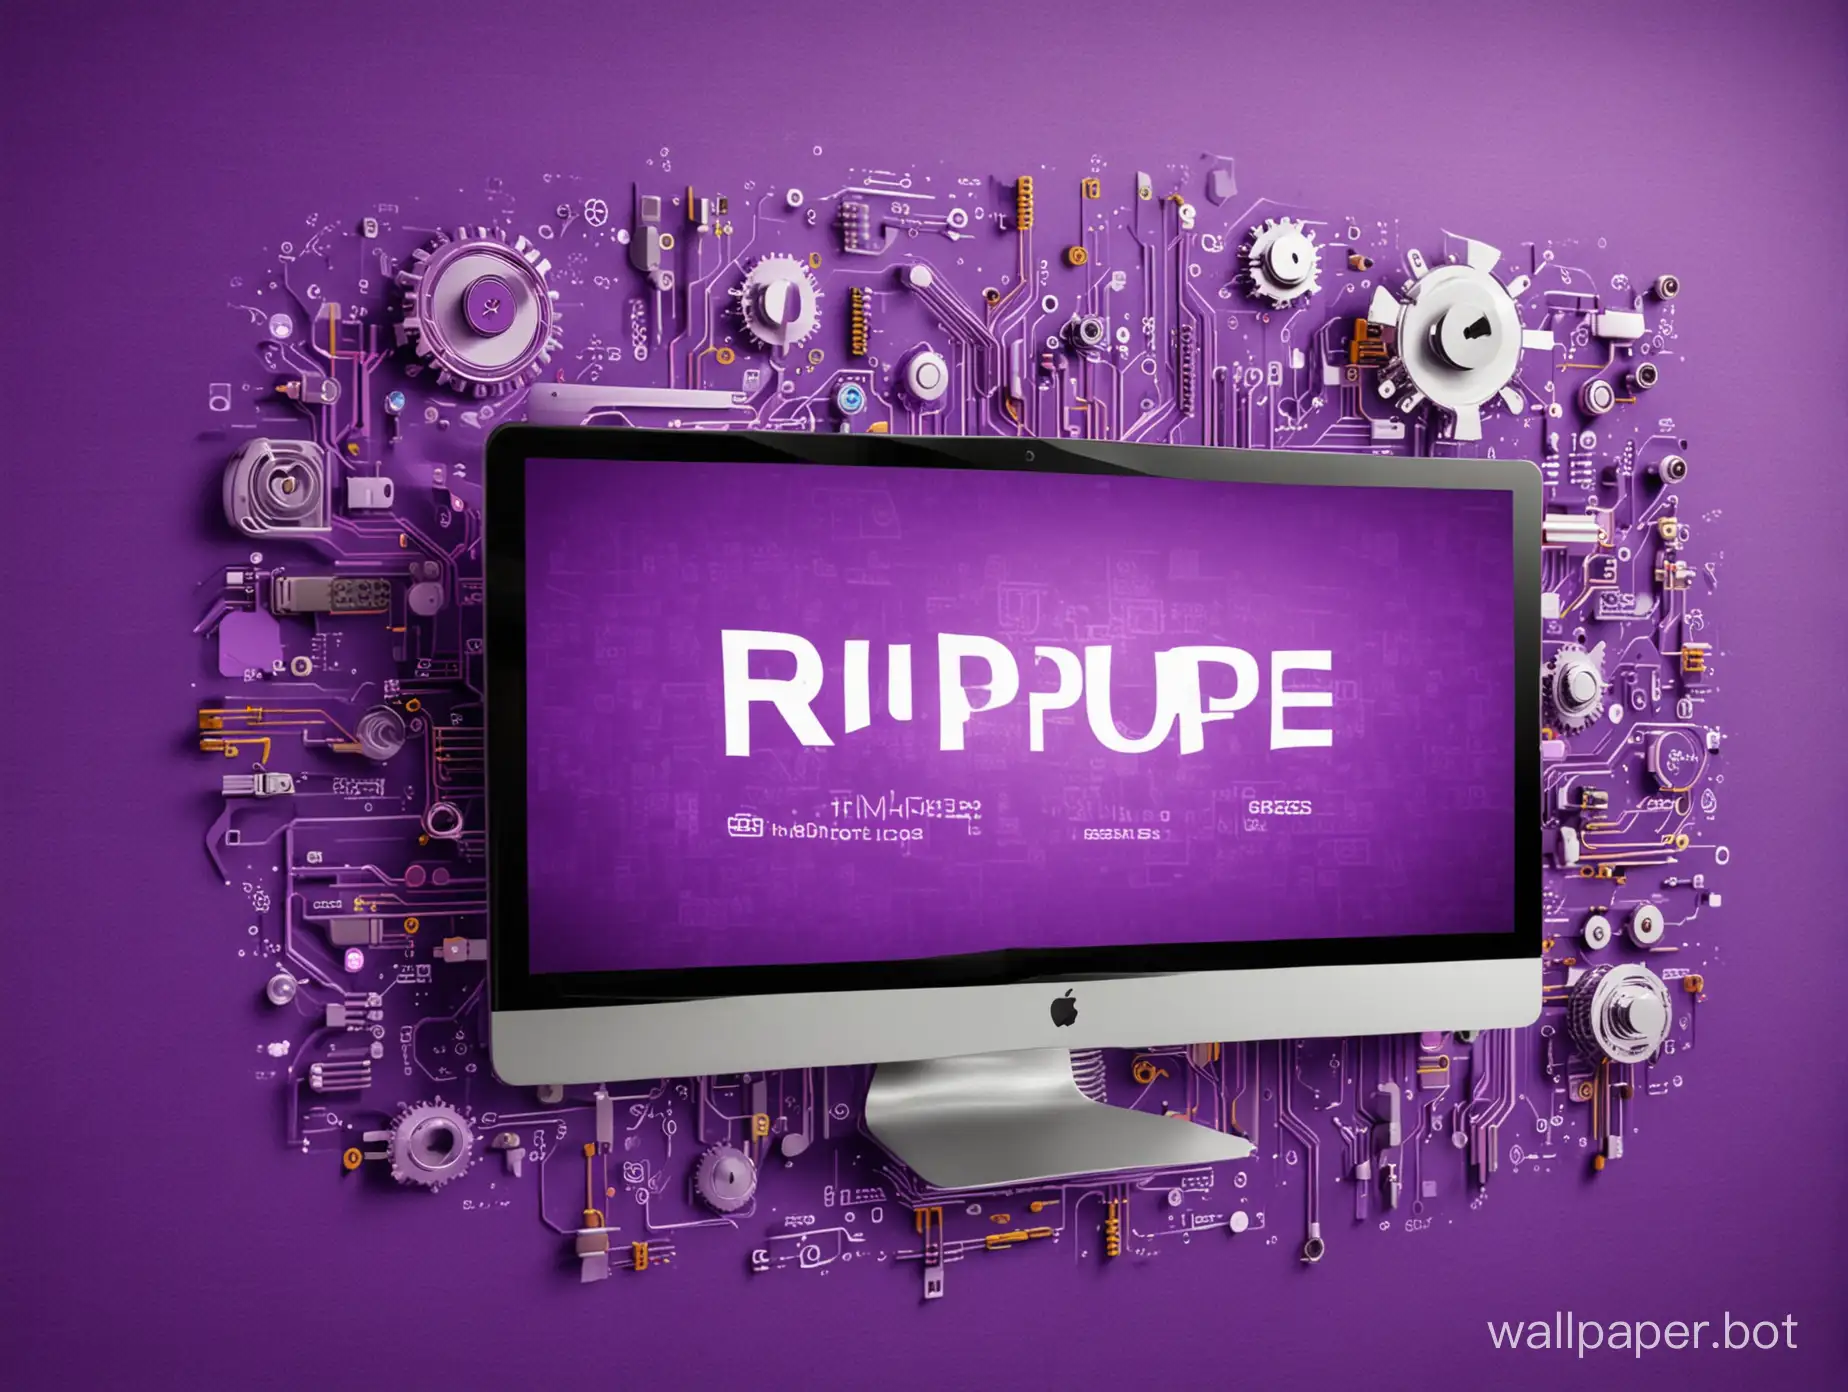 technology wall paper design with software and hardware with bright colours images with compny logo "Purple Technologies"